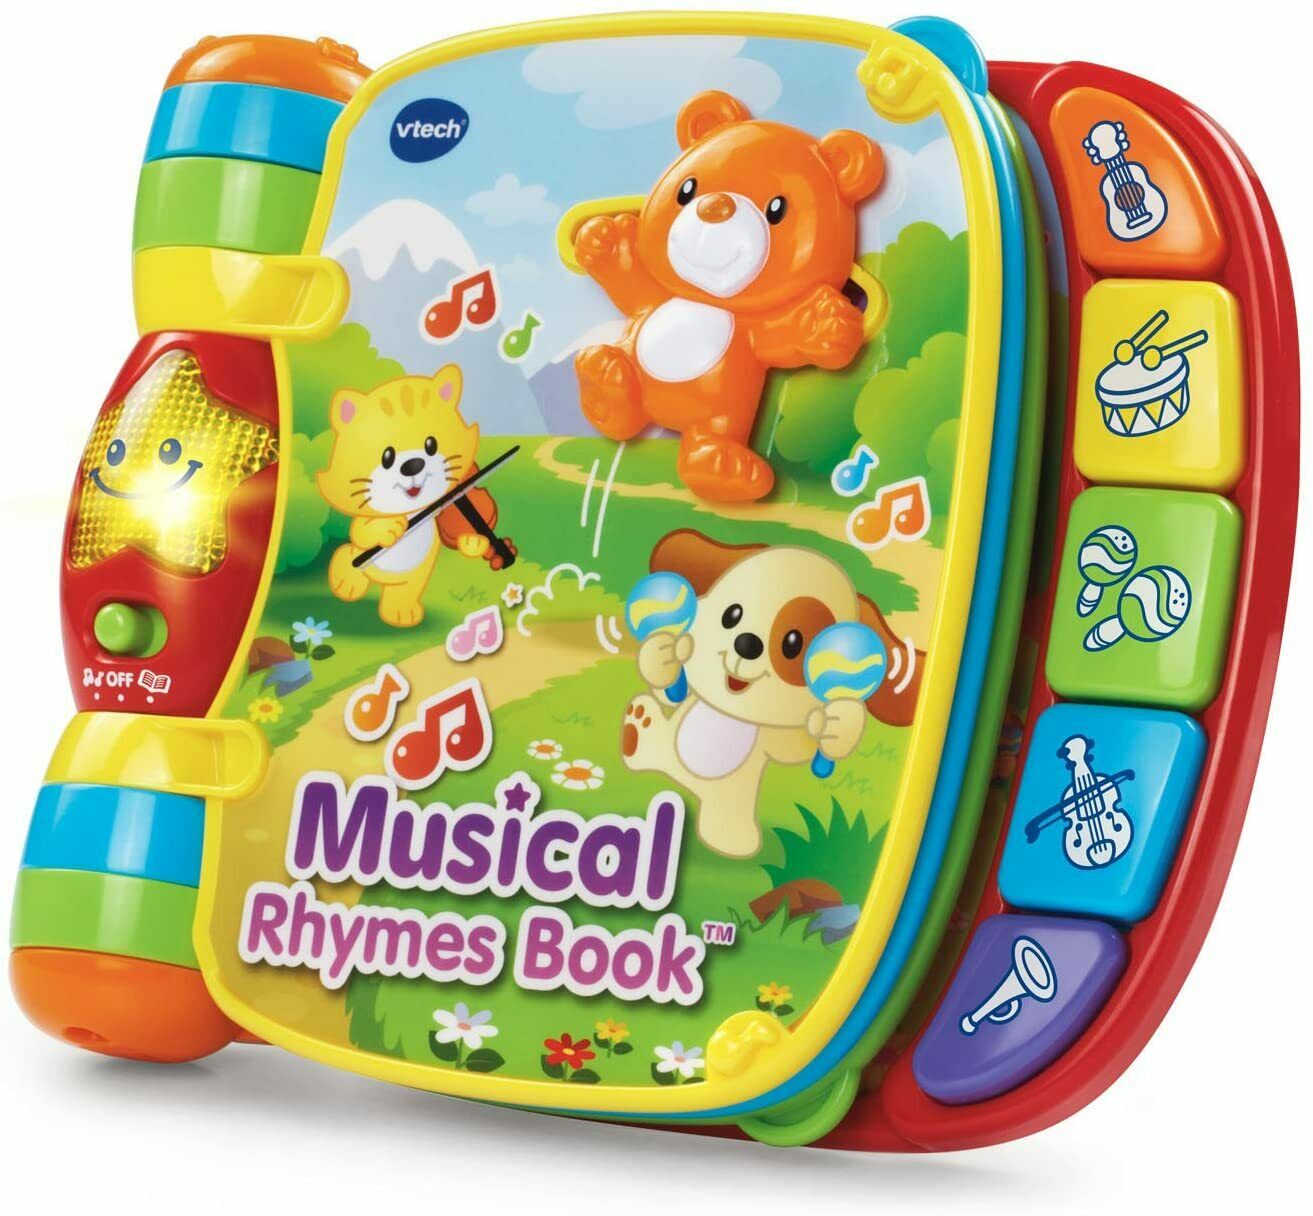 Learning & Educational Musical Toys Gift For Baby Kids Toddlers 1 2 3 Year Old